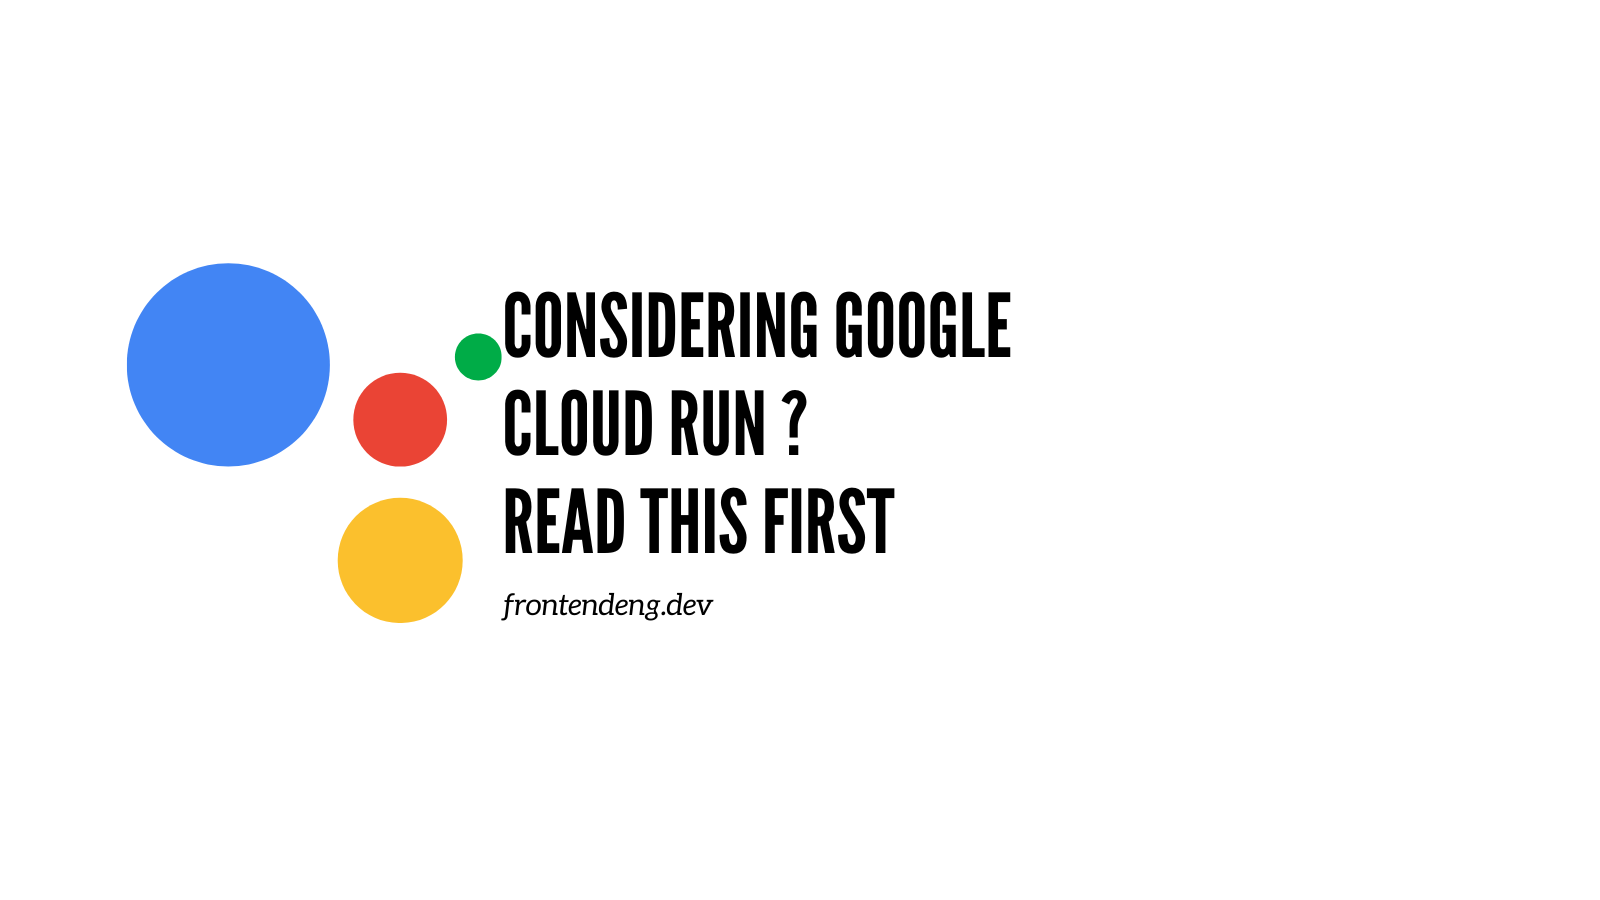 Google cloud run : Things you should know before deploying your frontends